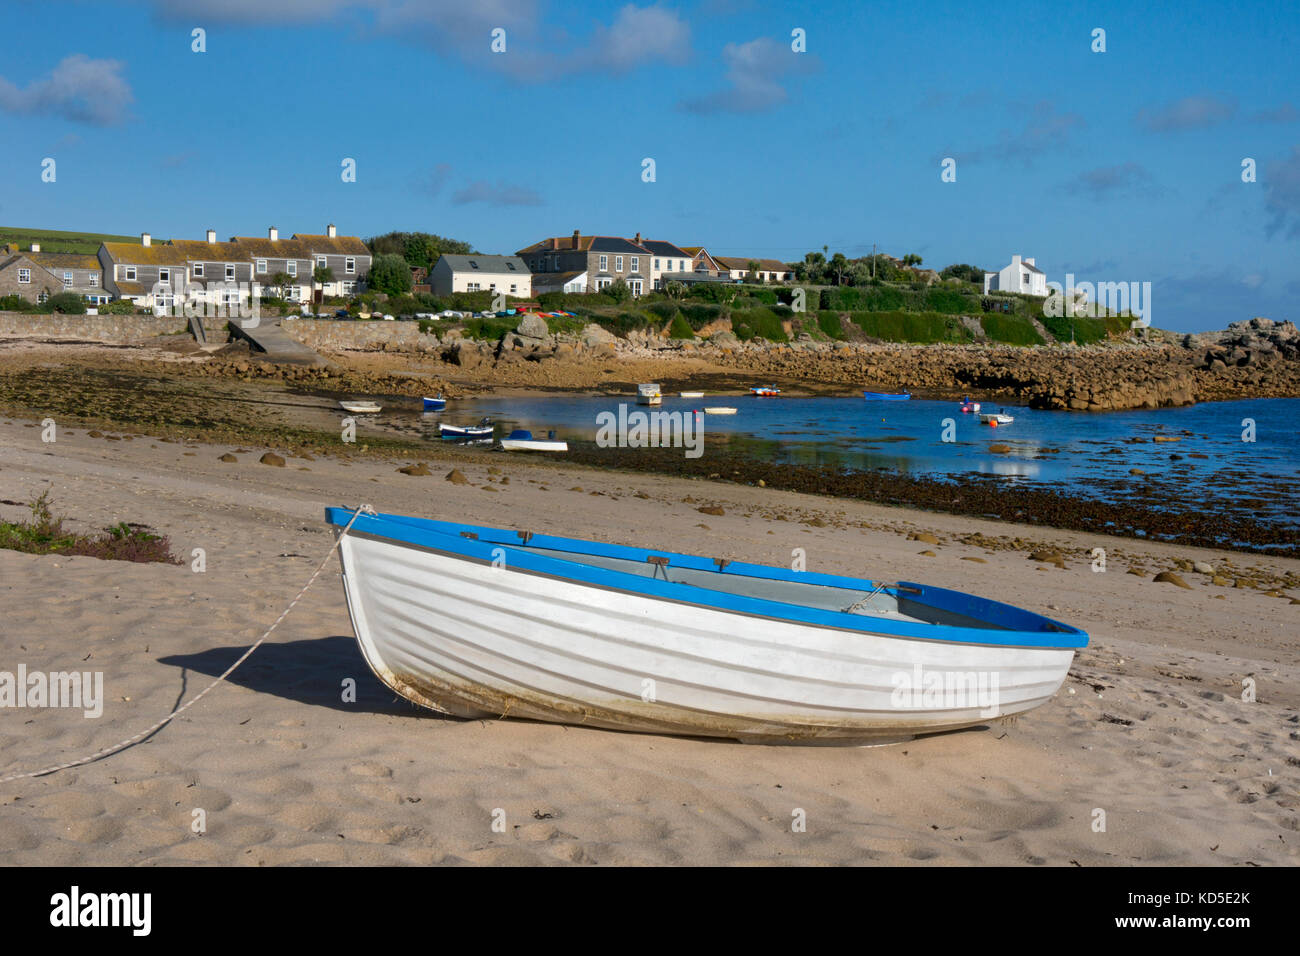 Old Town Bay,st.Mary's,Isole Scilly,Isole britanniche Foto Stock